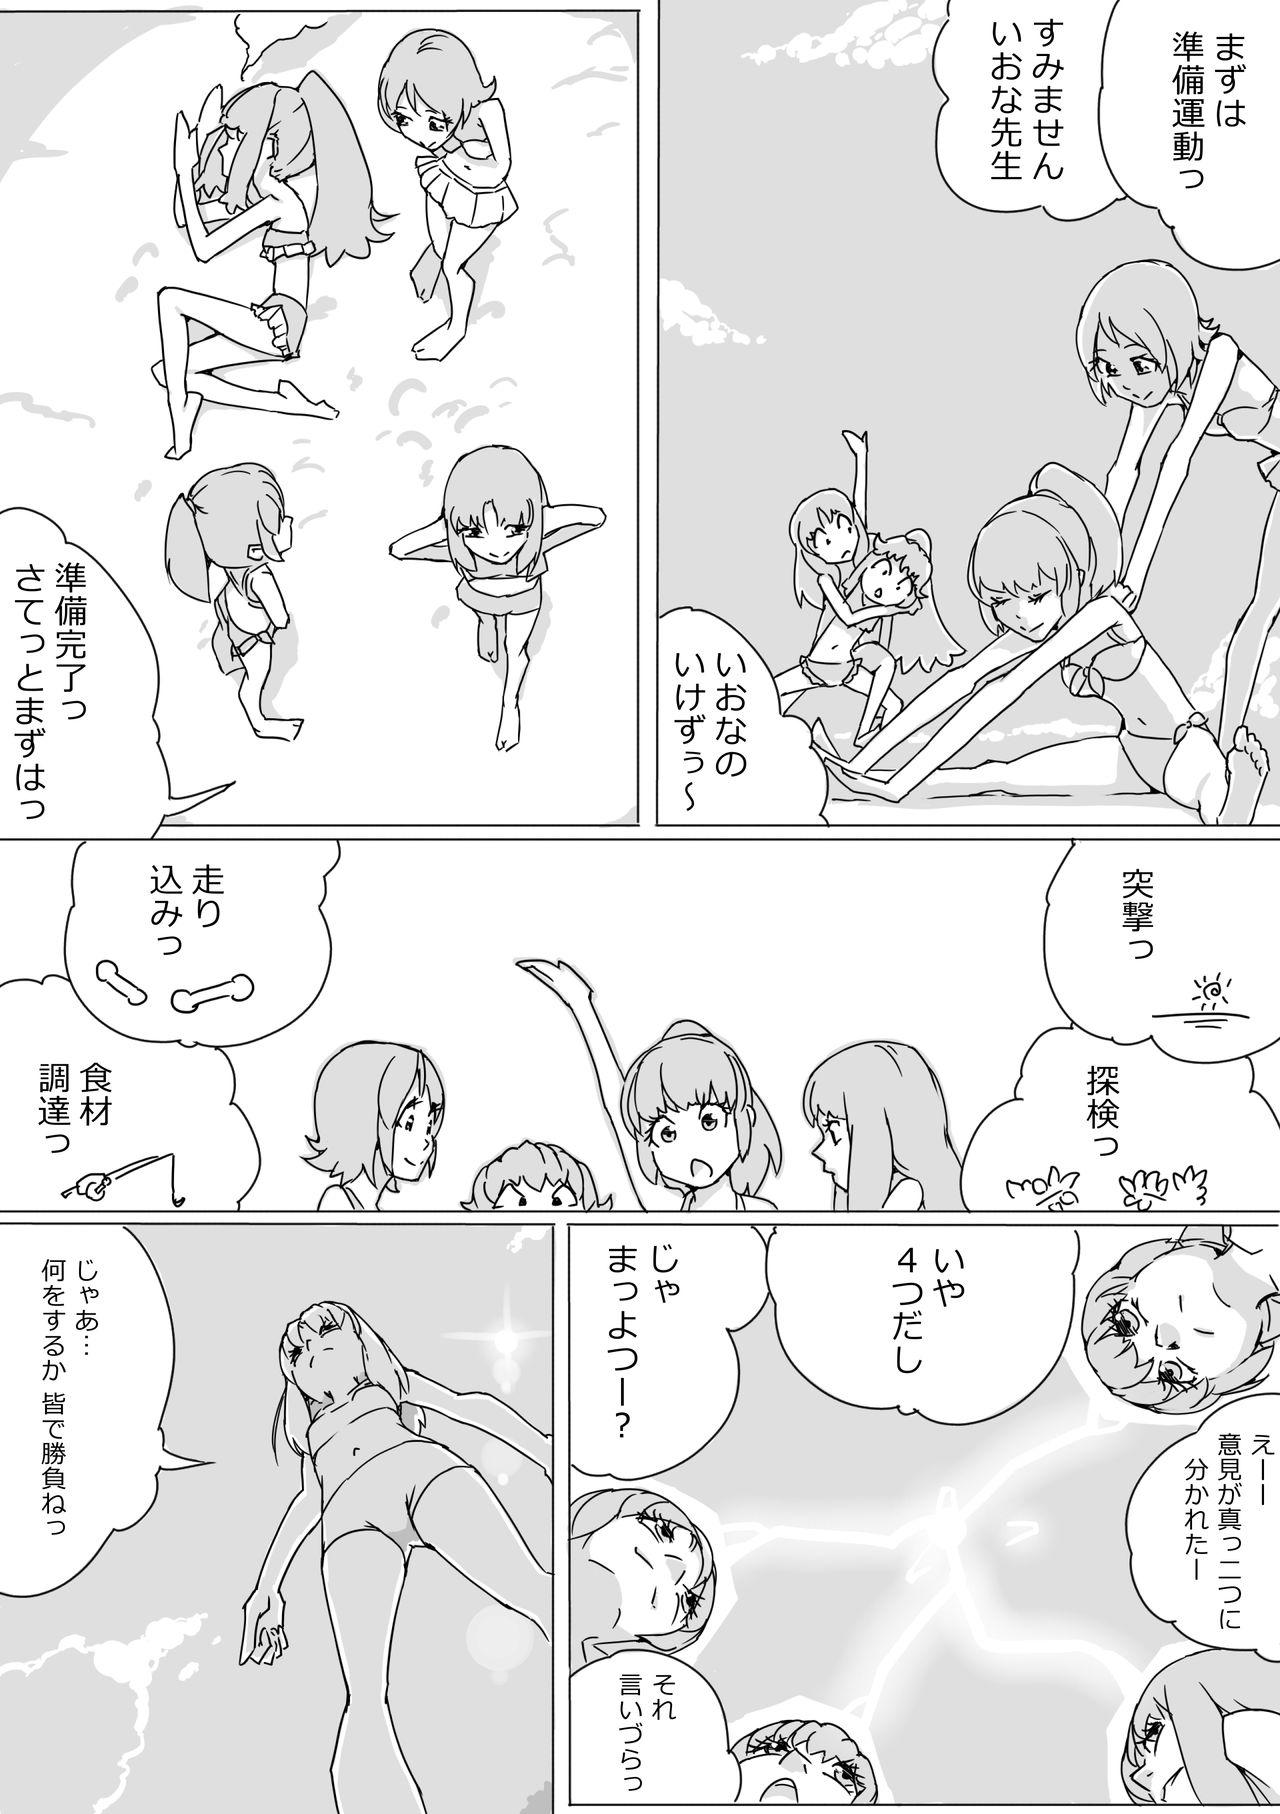 Asian Babes Untitled Precure Doujinshi - Pretty cure High Heels - Page 3